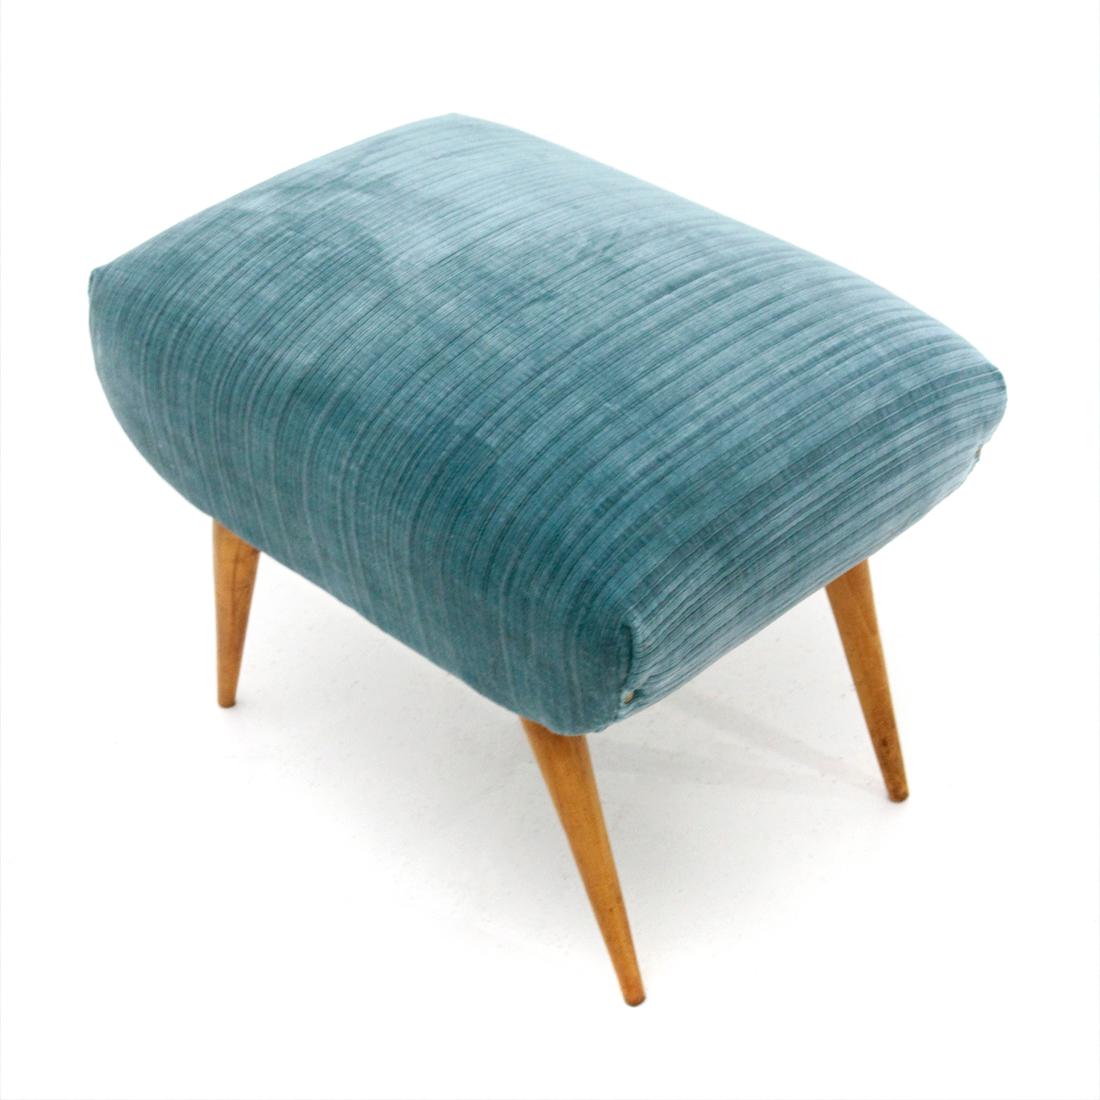 Italian manufactured pouf produced in the 1950s.
Seat in wood padded and lined with new velvet fabric.
Legs in turned conical wood.
Good general conditions, some signs due to normal use over time.

Dimensions: Length 50 cm, depth 37 cm, height